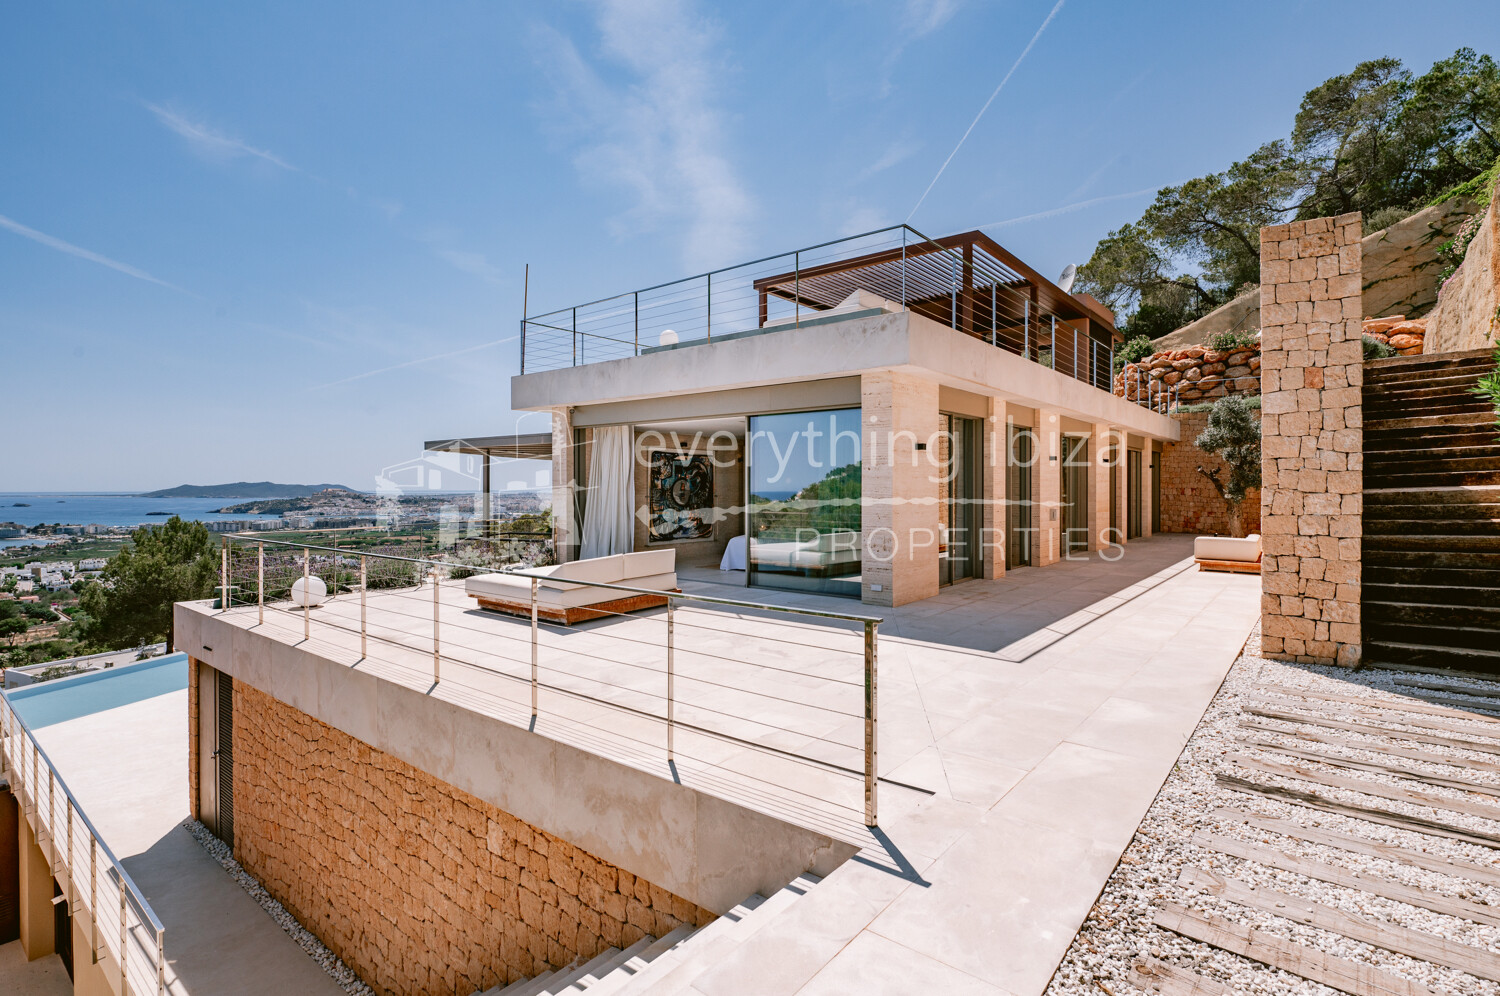 Stunning Contemporary 6 Bedroom Villa with Amazing Panoramic Views, ref. 1718, for sale in Ibiza by everything ibiza Properties